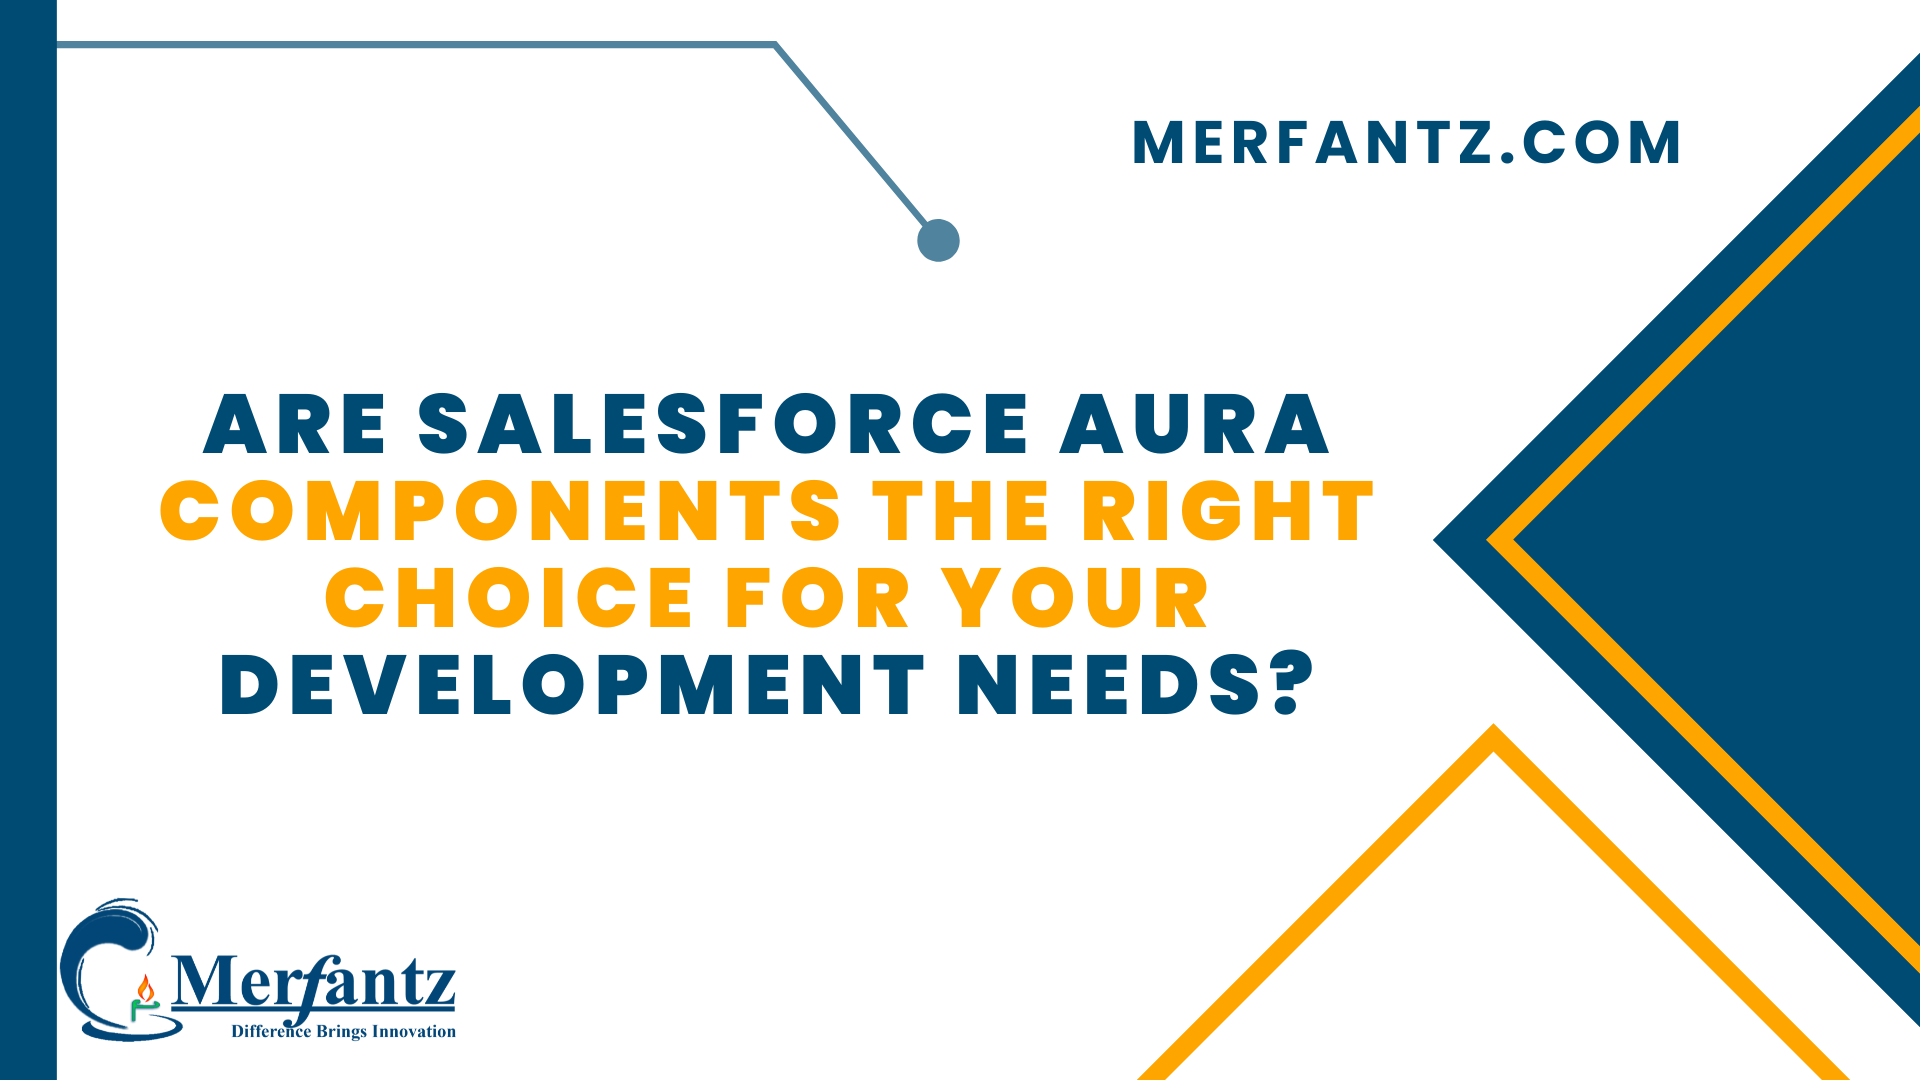 Are Salesforce Aura Components the Right Choice for Your Development Needs